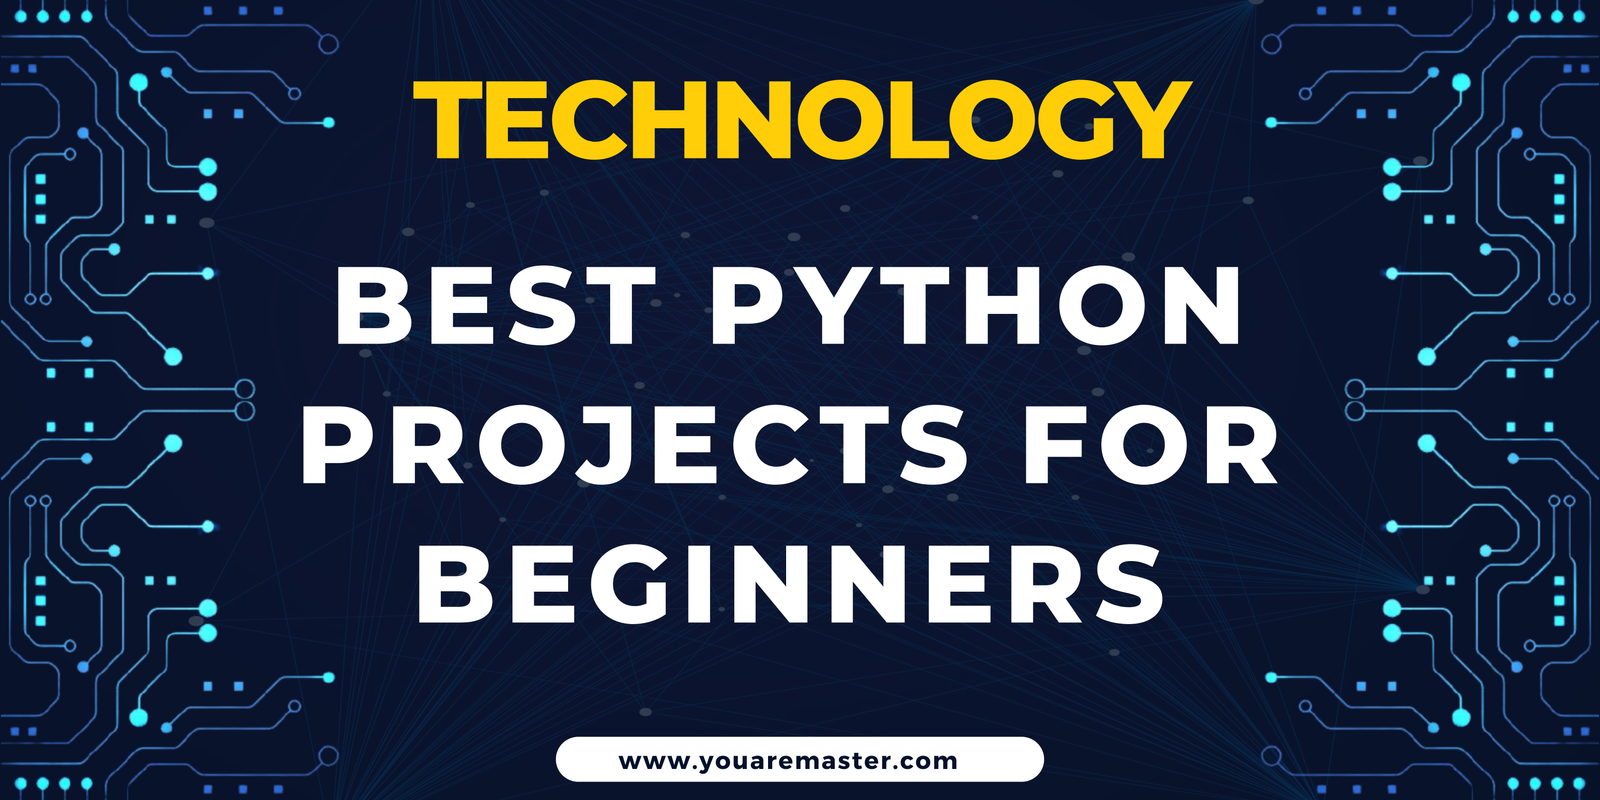 Best Python Projects for Beginners